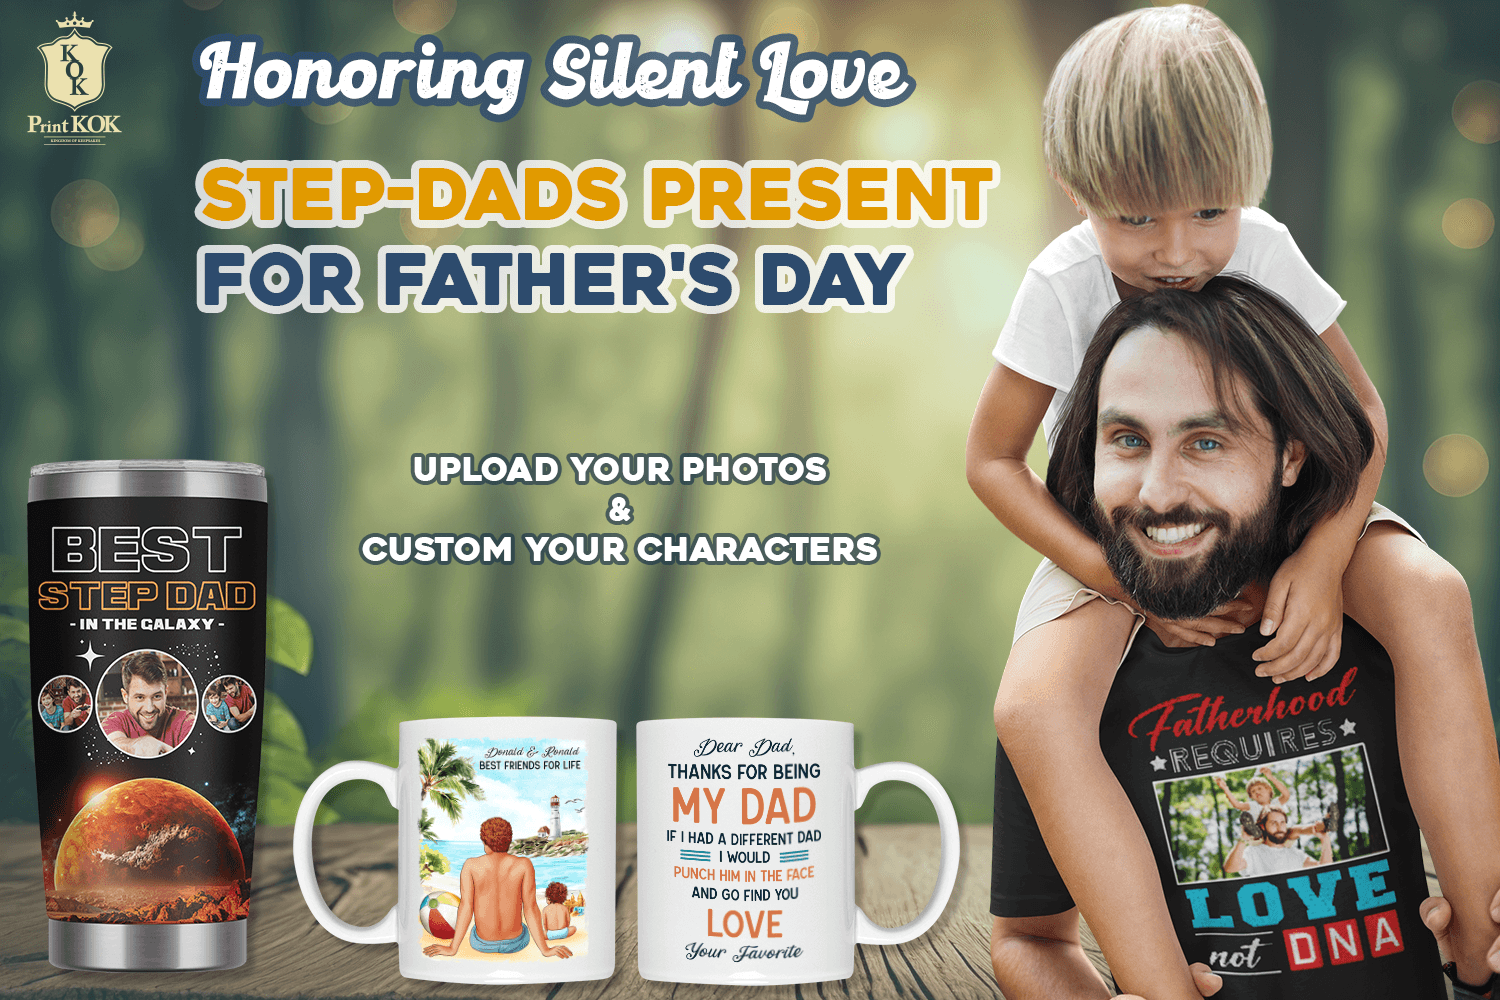 Honoring Silent Love: STEP-DADS PRESENT FOR FATHER'S DAY